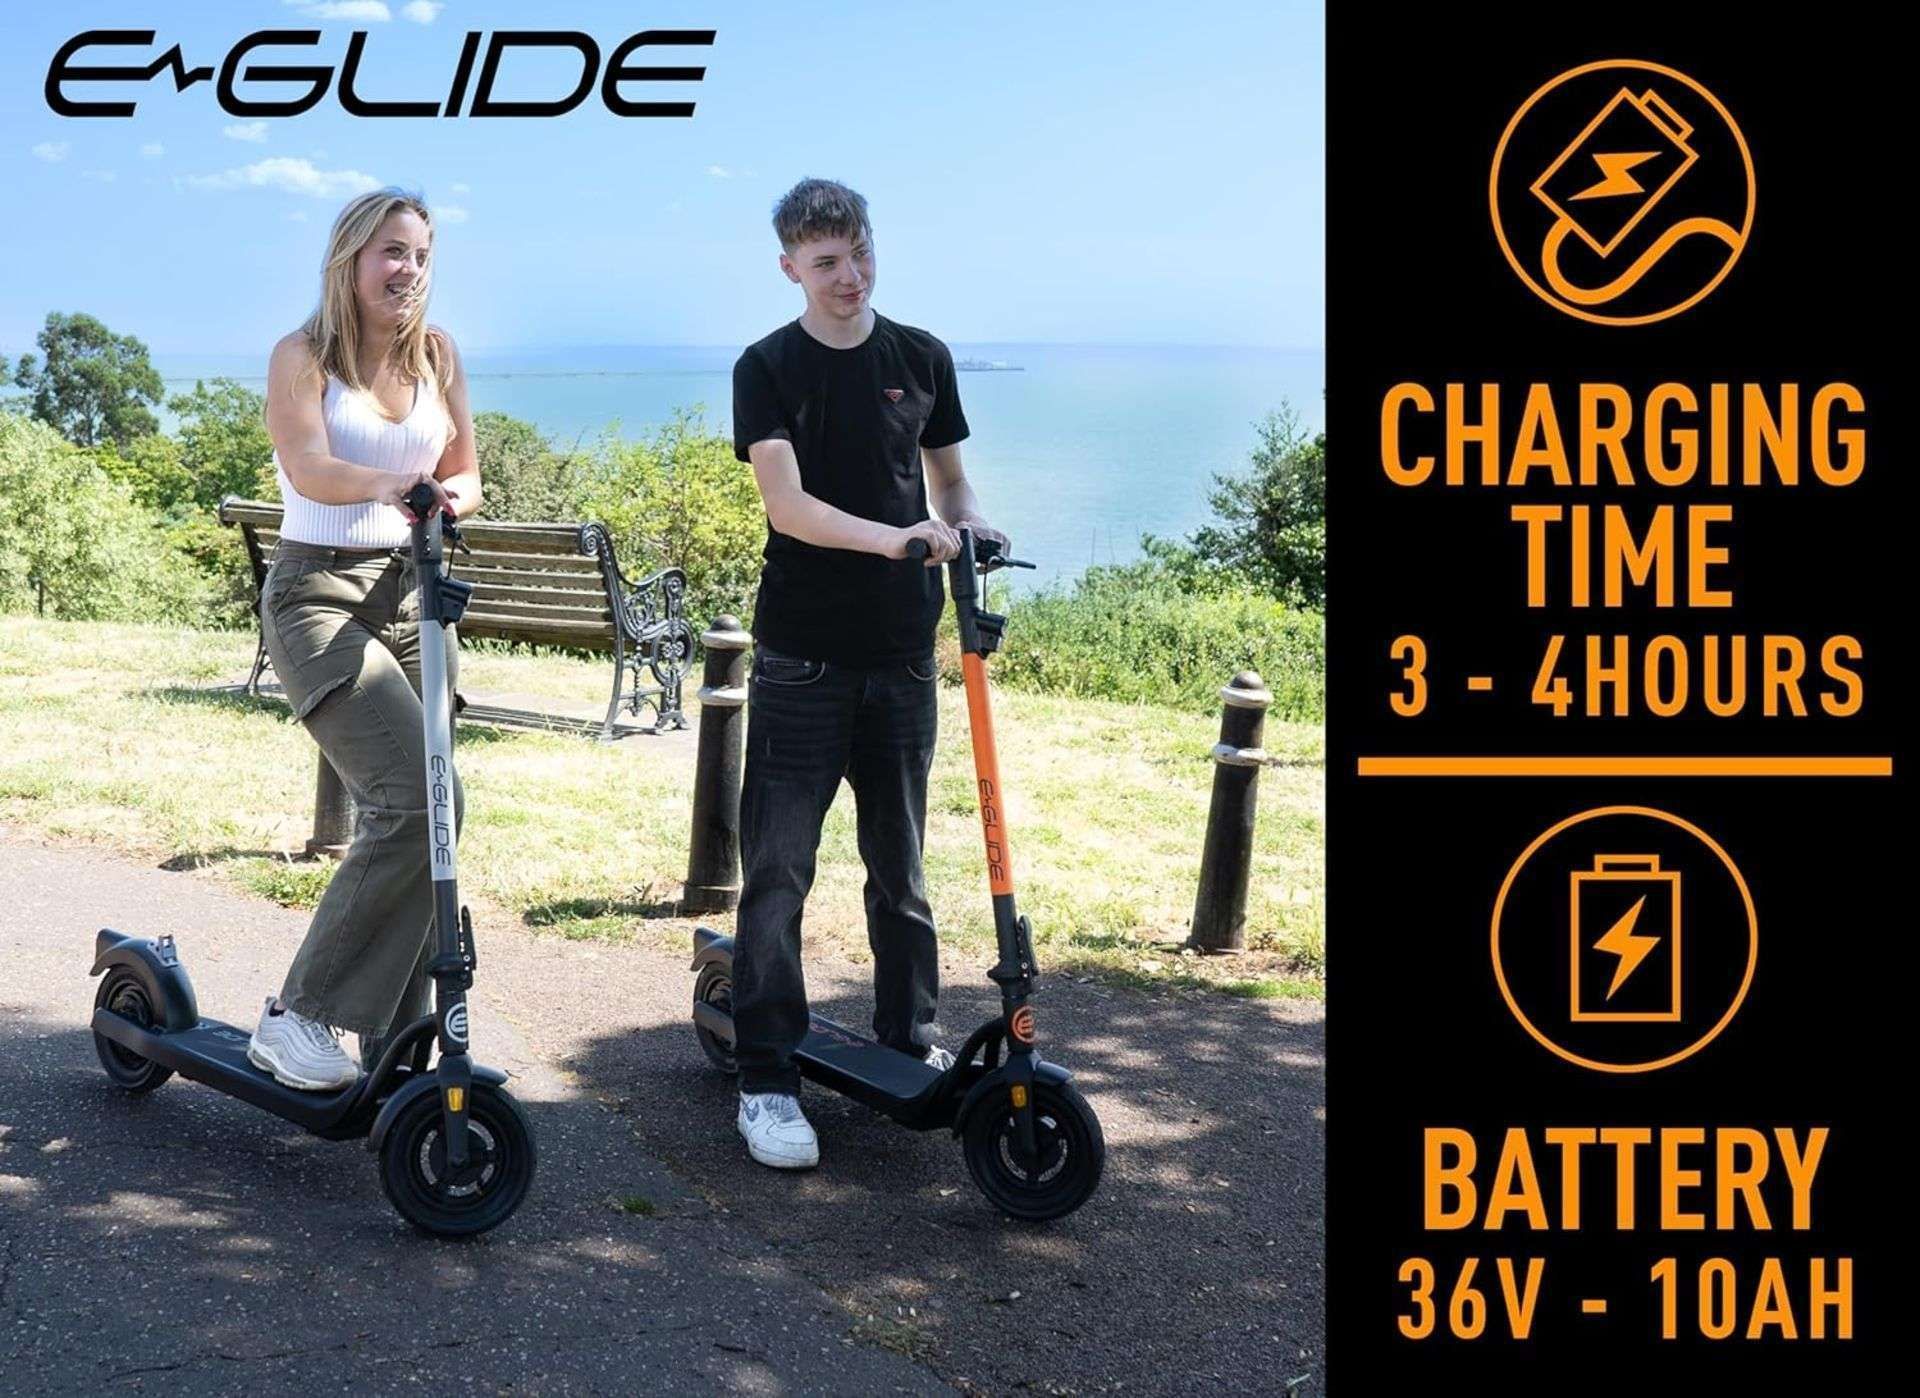 Brand New E-Glide V2 Electric Scooter Grey and Black RRP £599, Introducing a sleek and efficient - Bild 4 aus 5